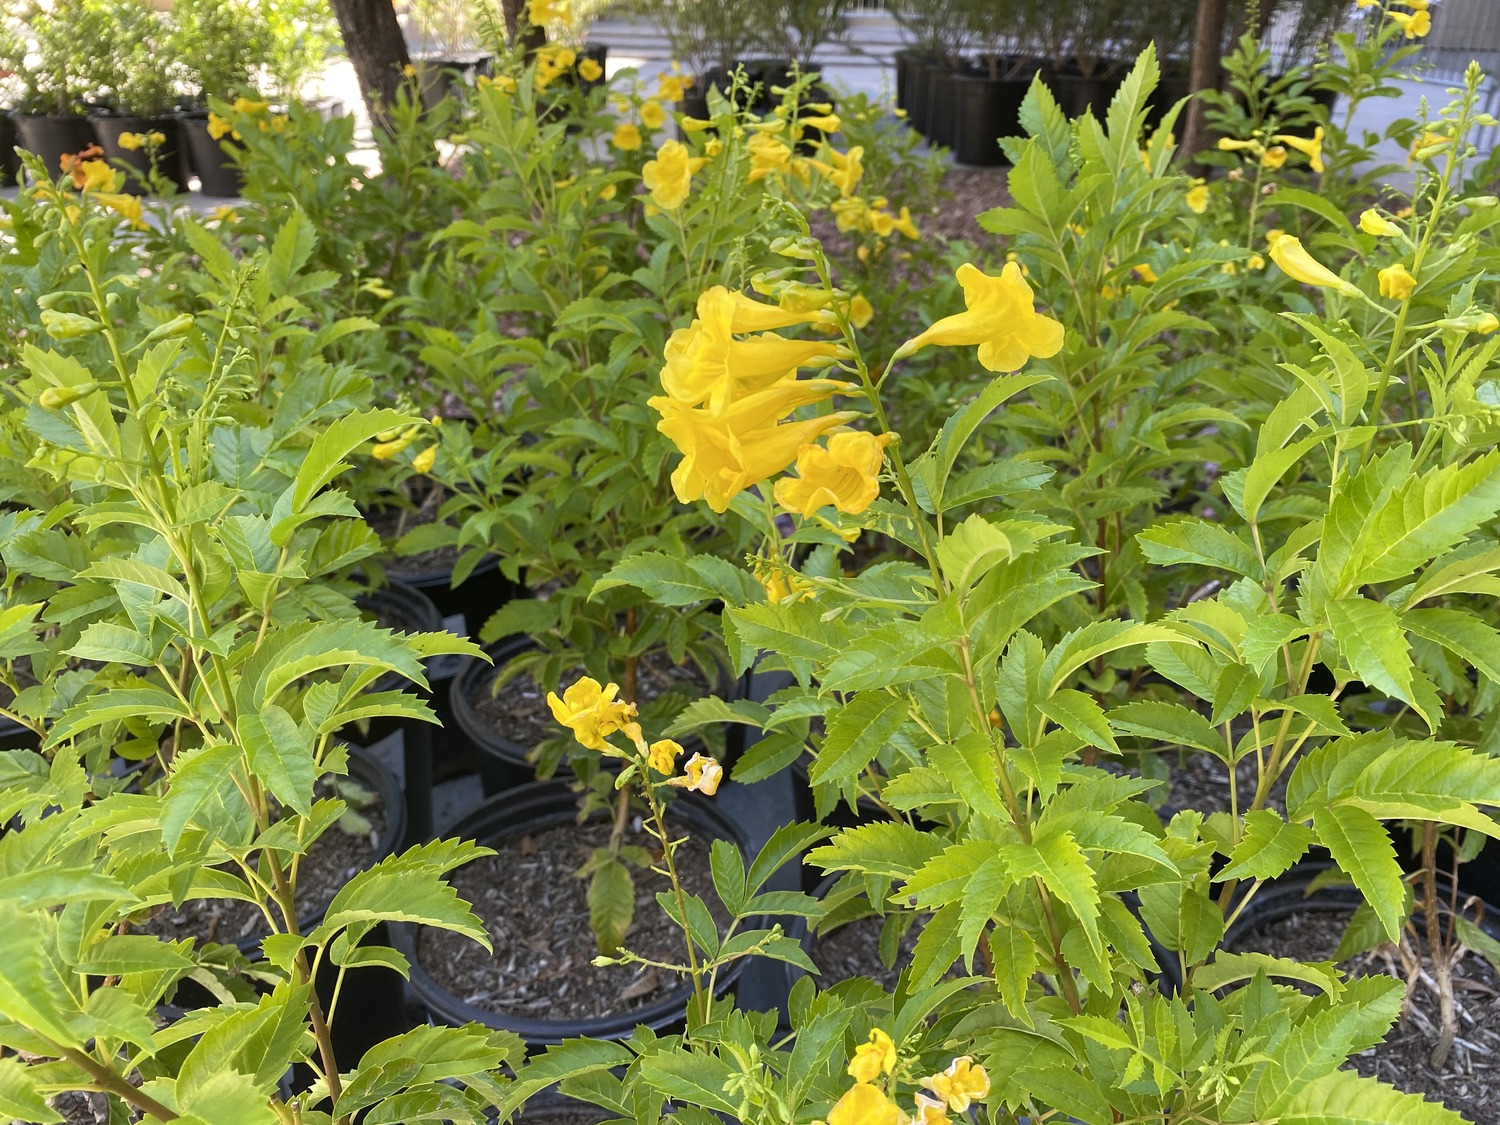 Yellow bells are a tough plant that looks tropical